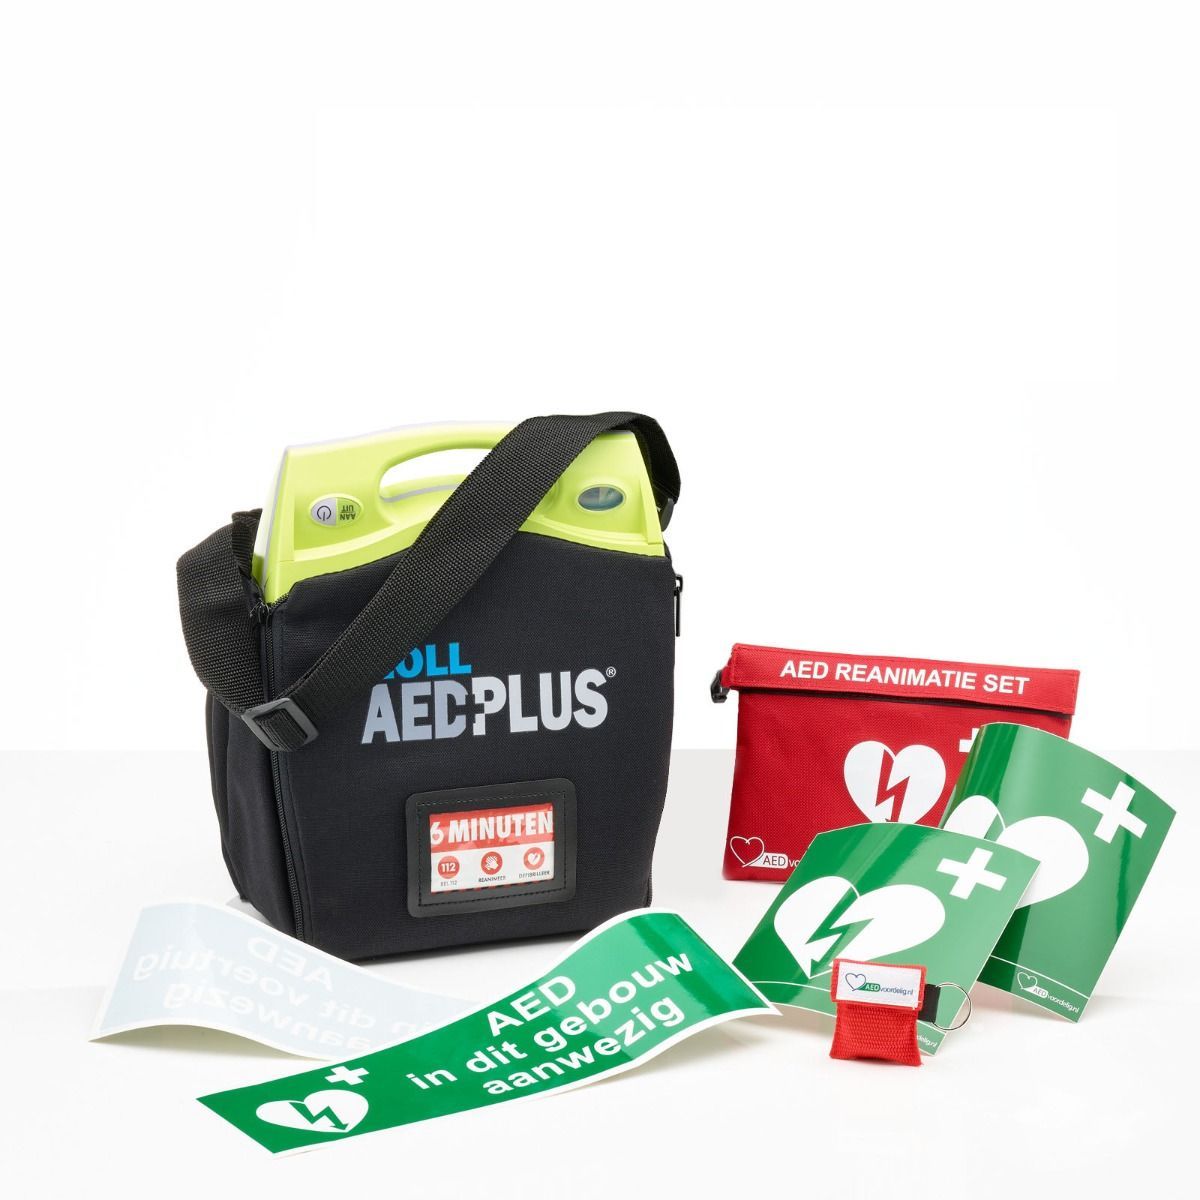 ZOLL AED Plus lease 